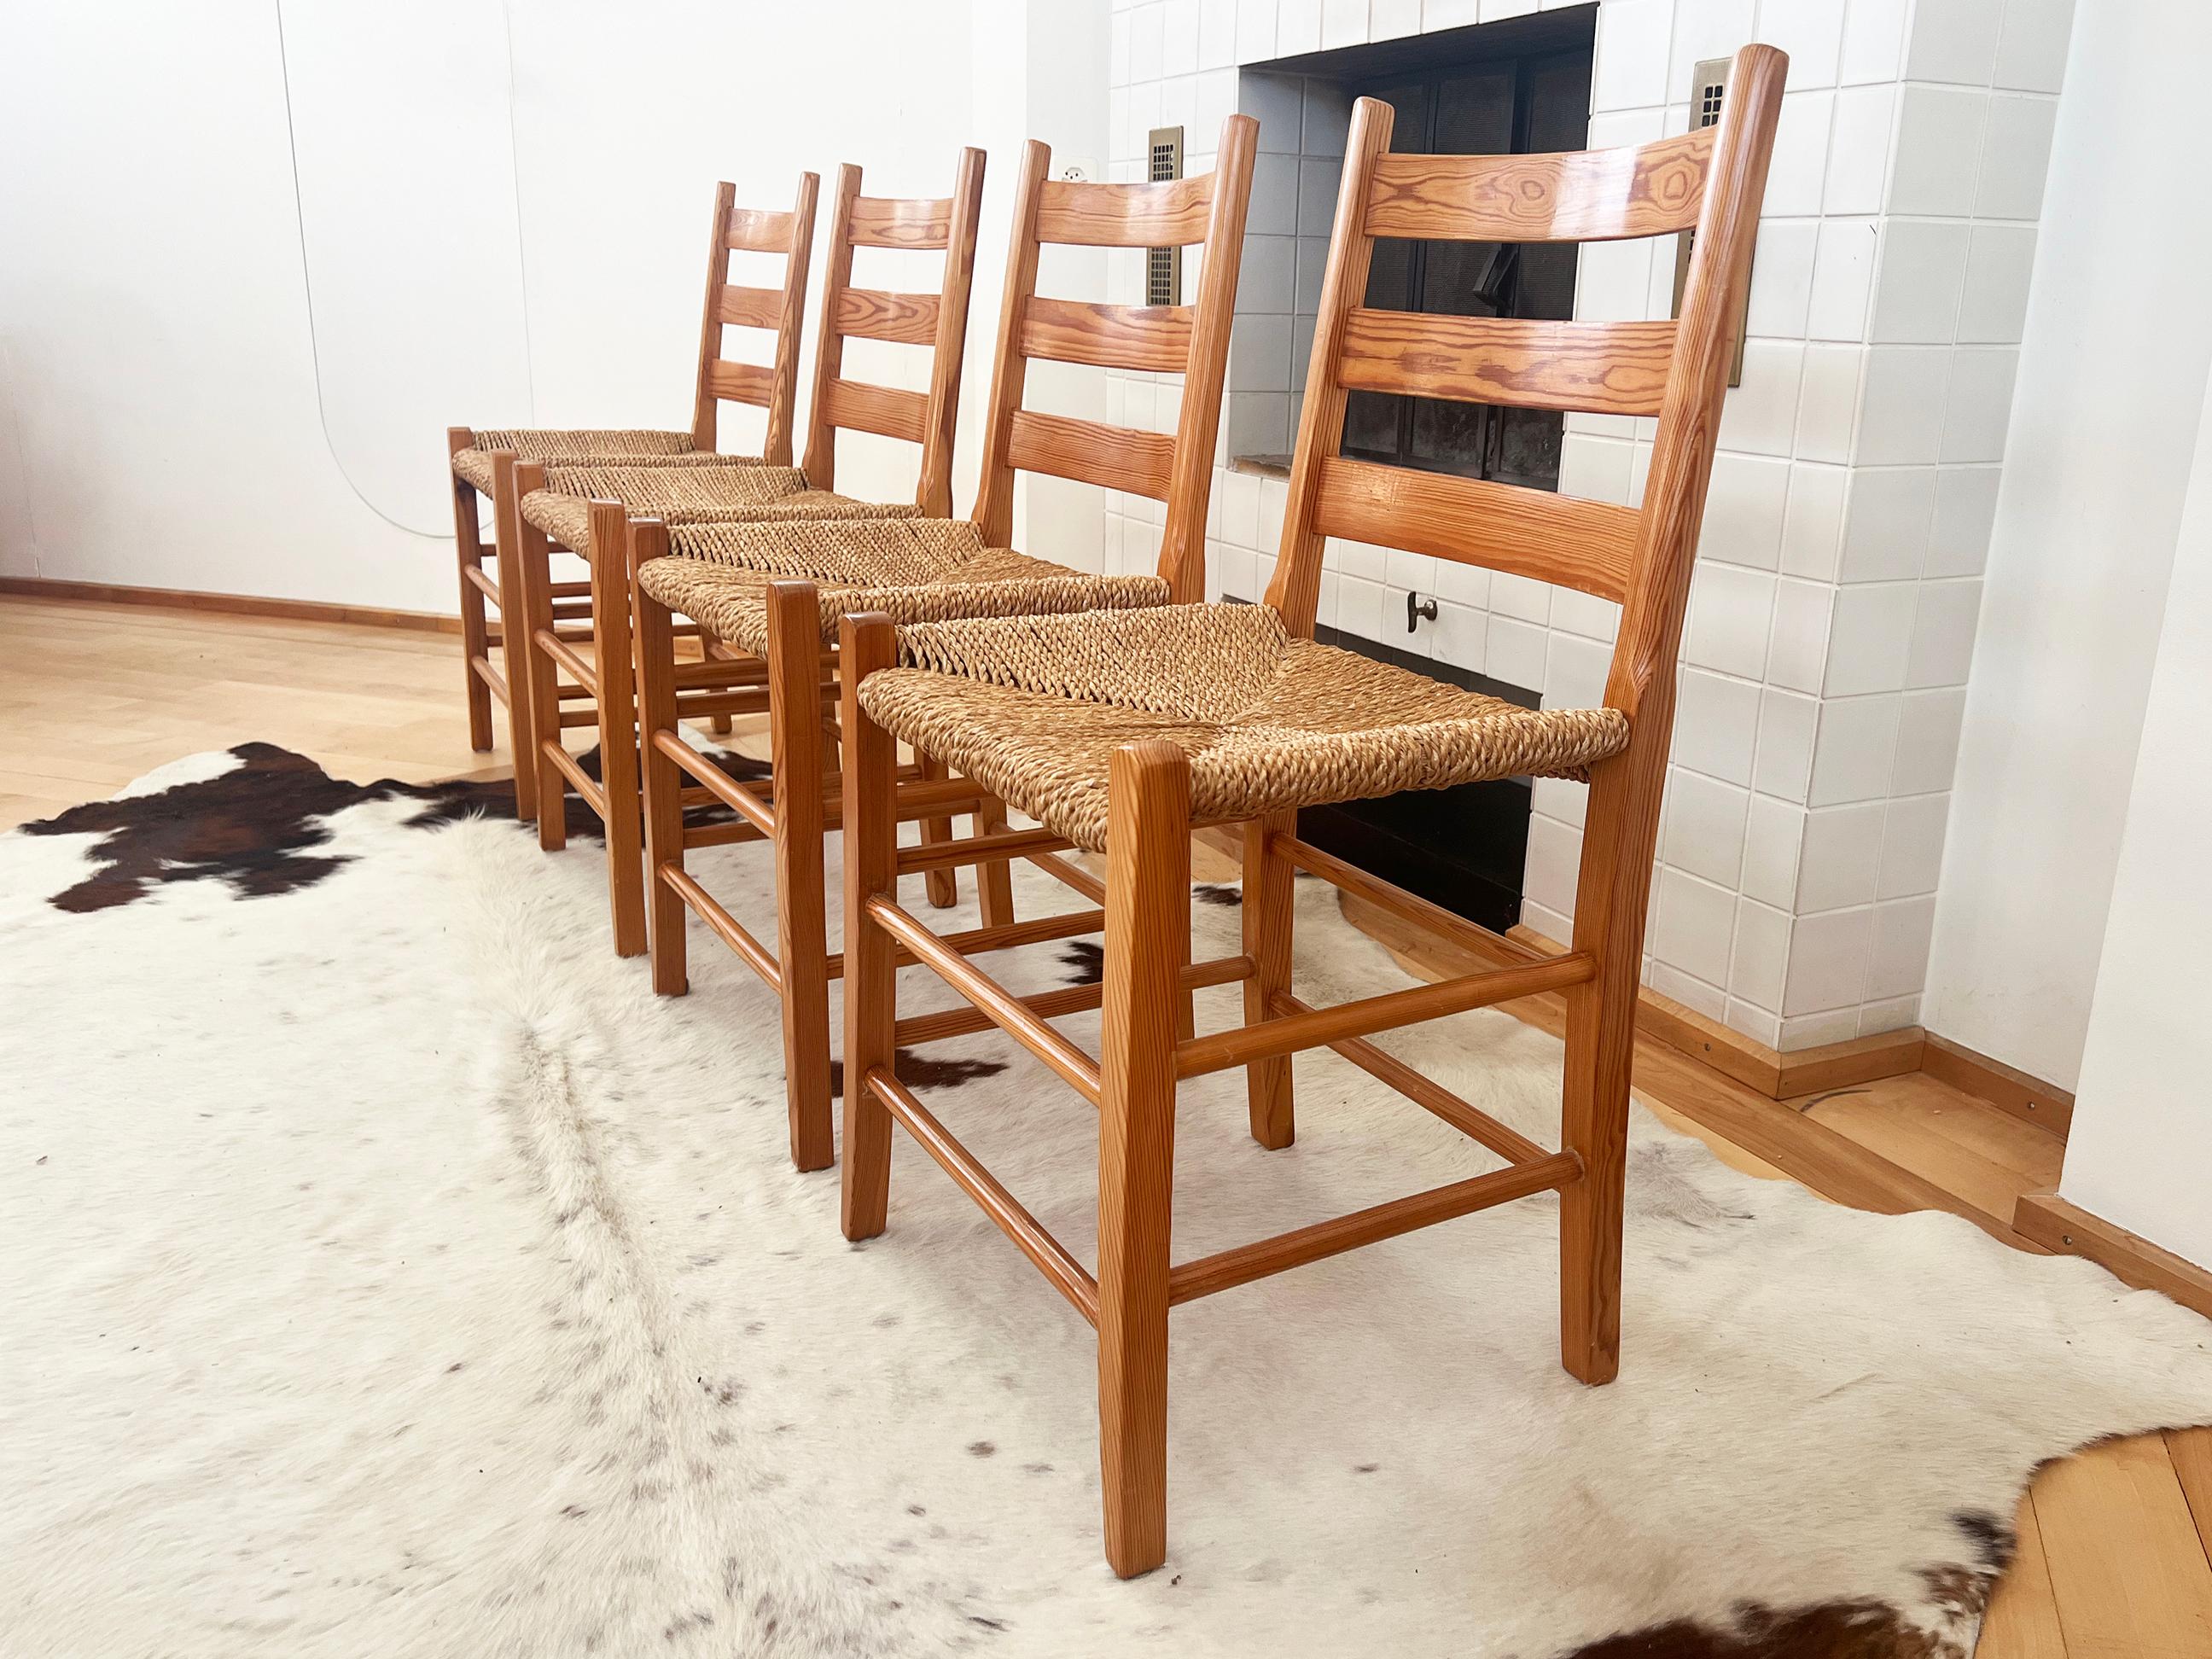 Scandinavian Modern Swedish 1970s Pine Ladder back Chairs with Rope woven seats -- Pair For Sale